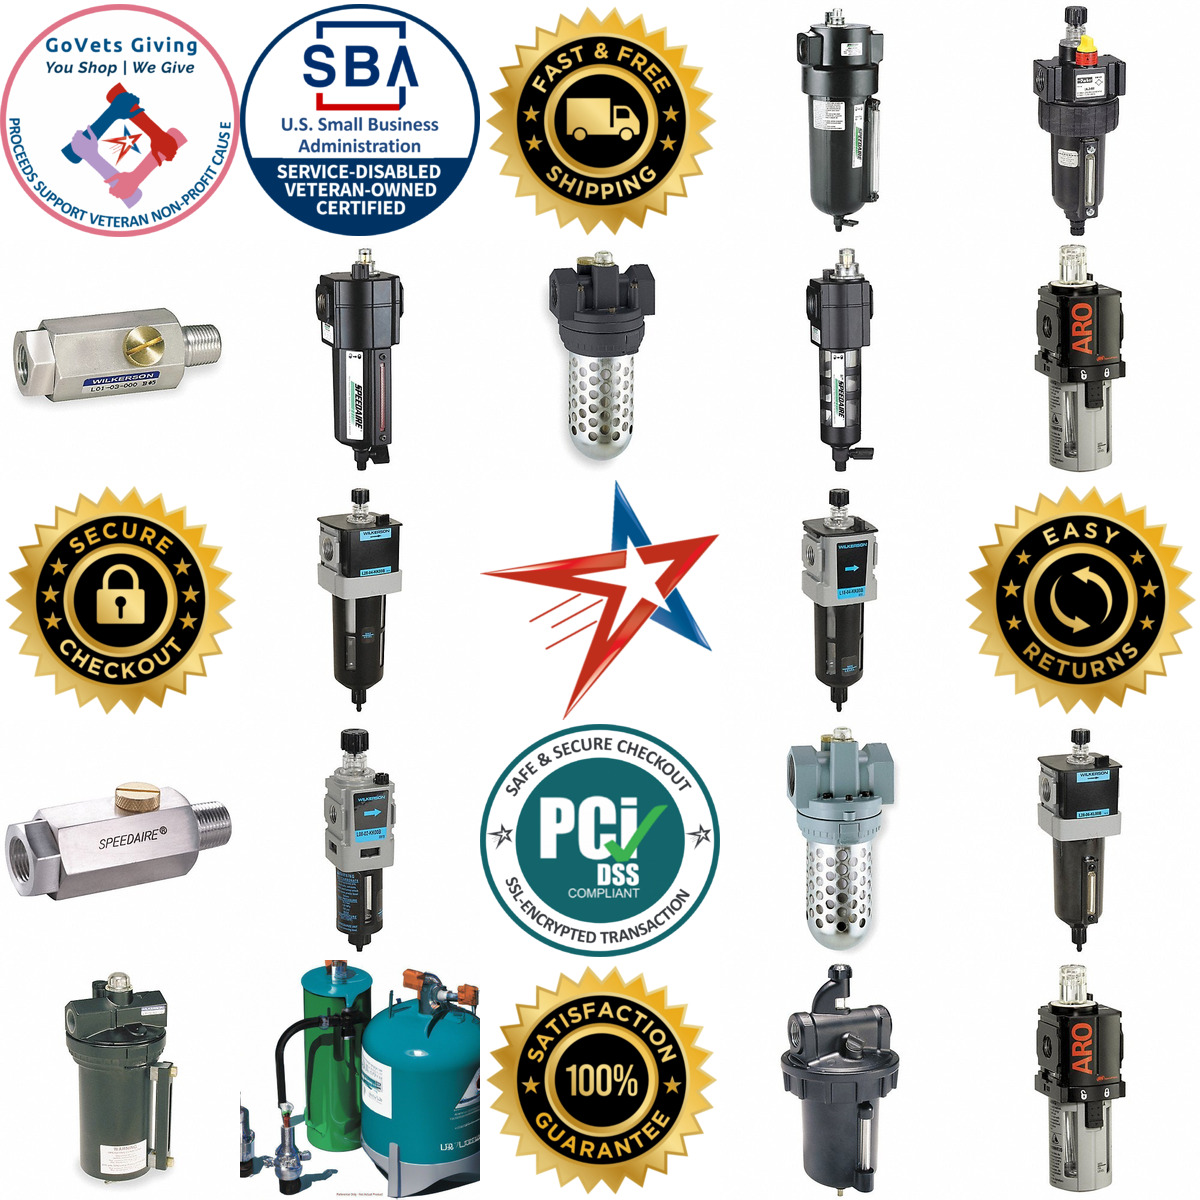 A selection of Compressed Air Lubricators products on GoVets